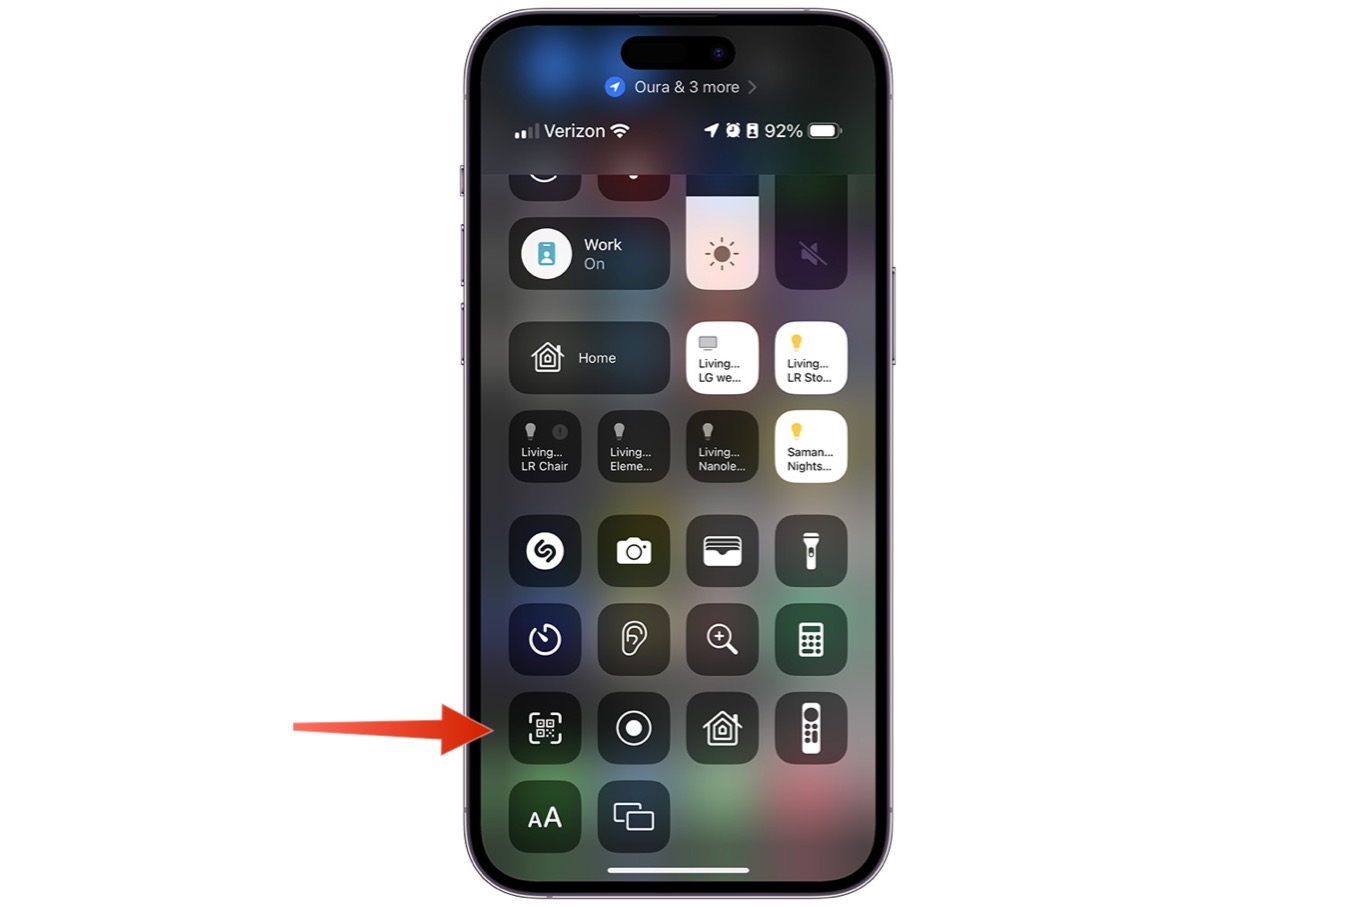 iOS 14 now has a nfc tag reader built into the control center : r/iphone